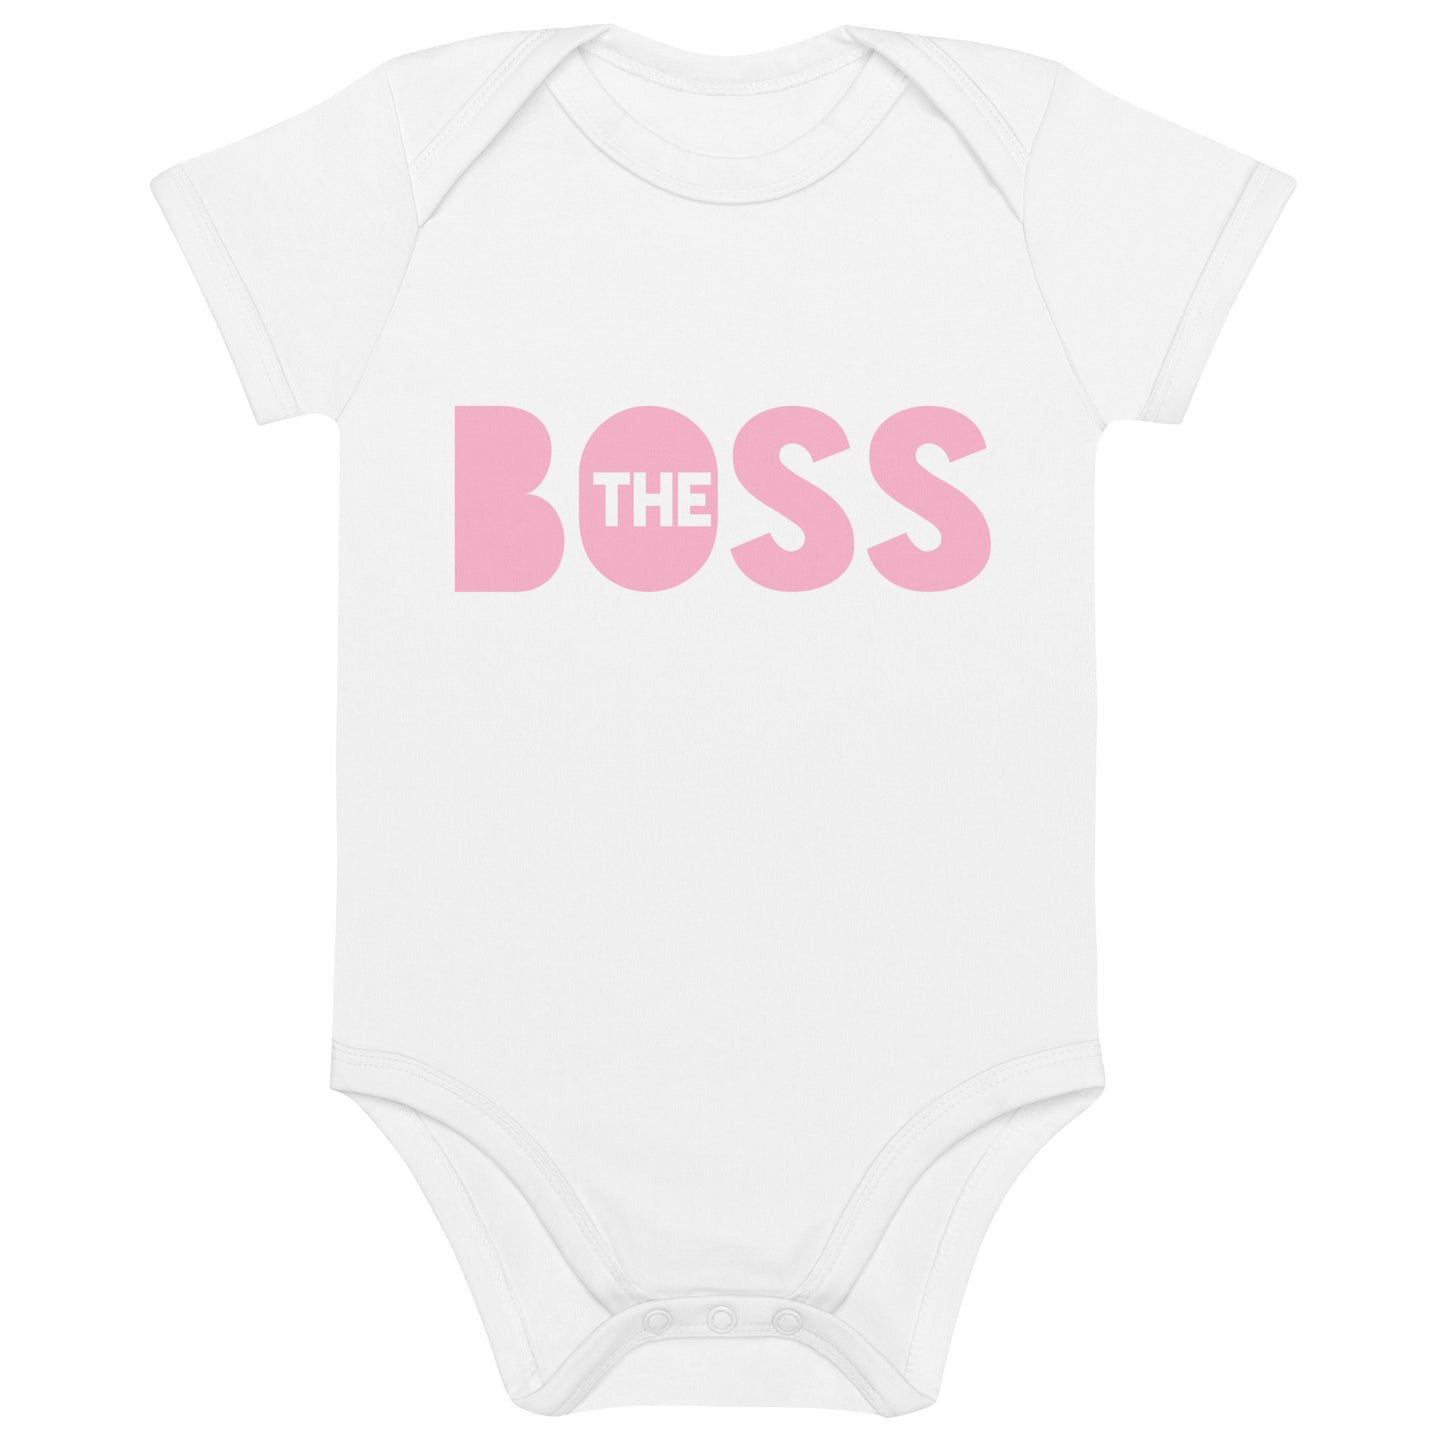 The Boss Organic cotton baby bodysuit | White and Pink